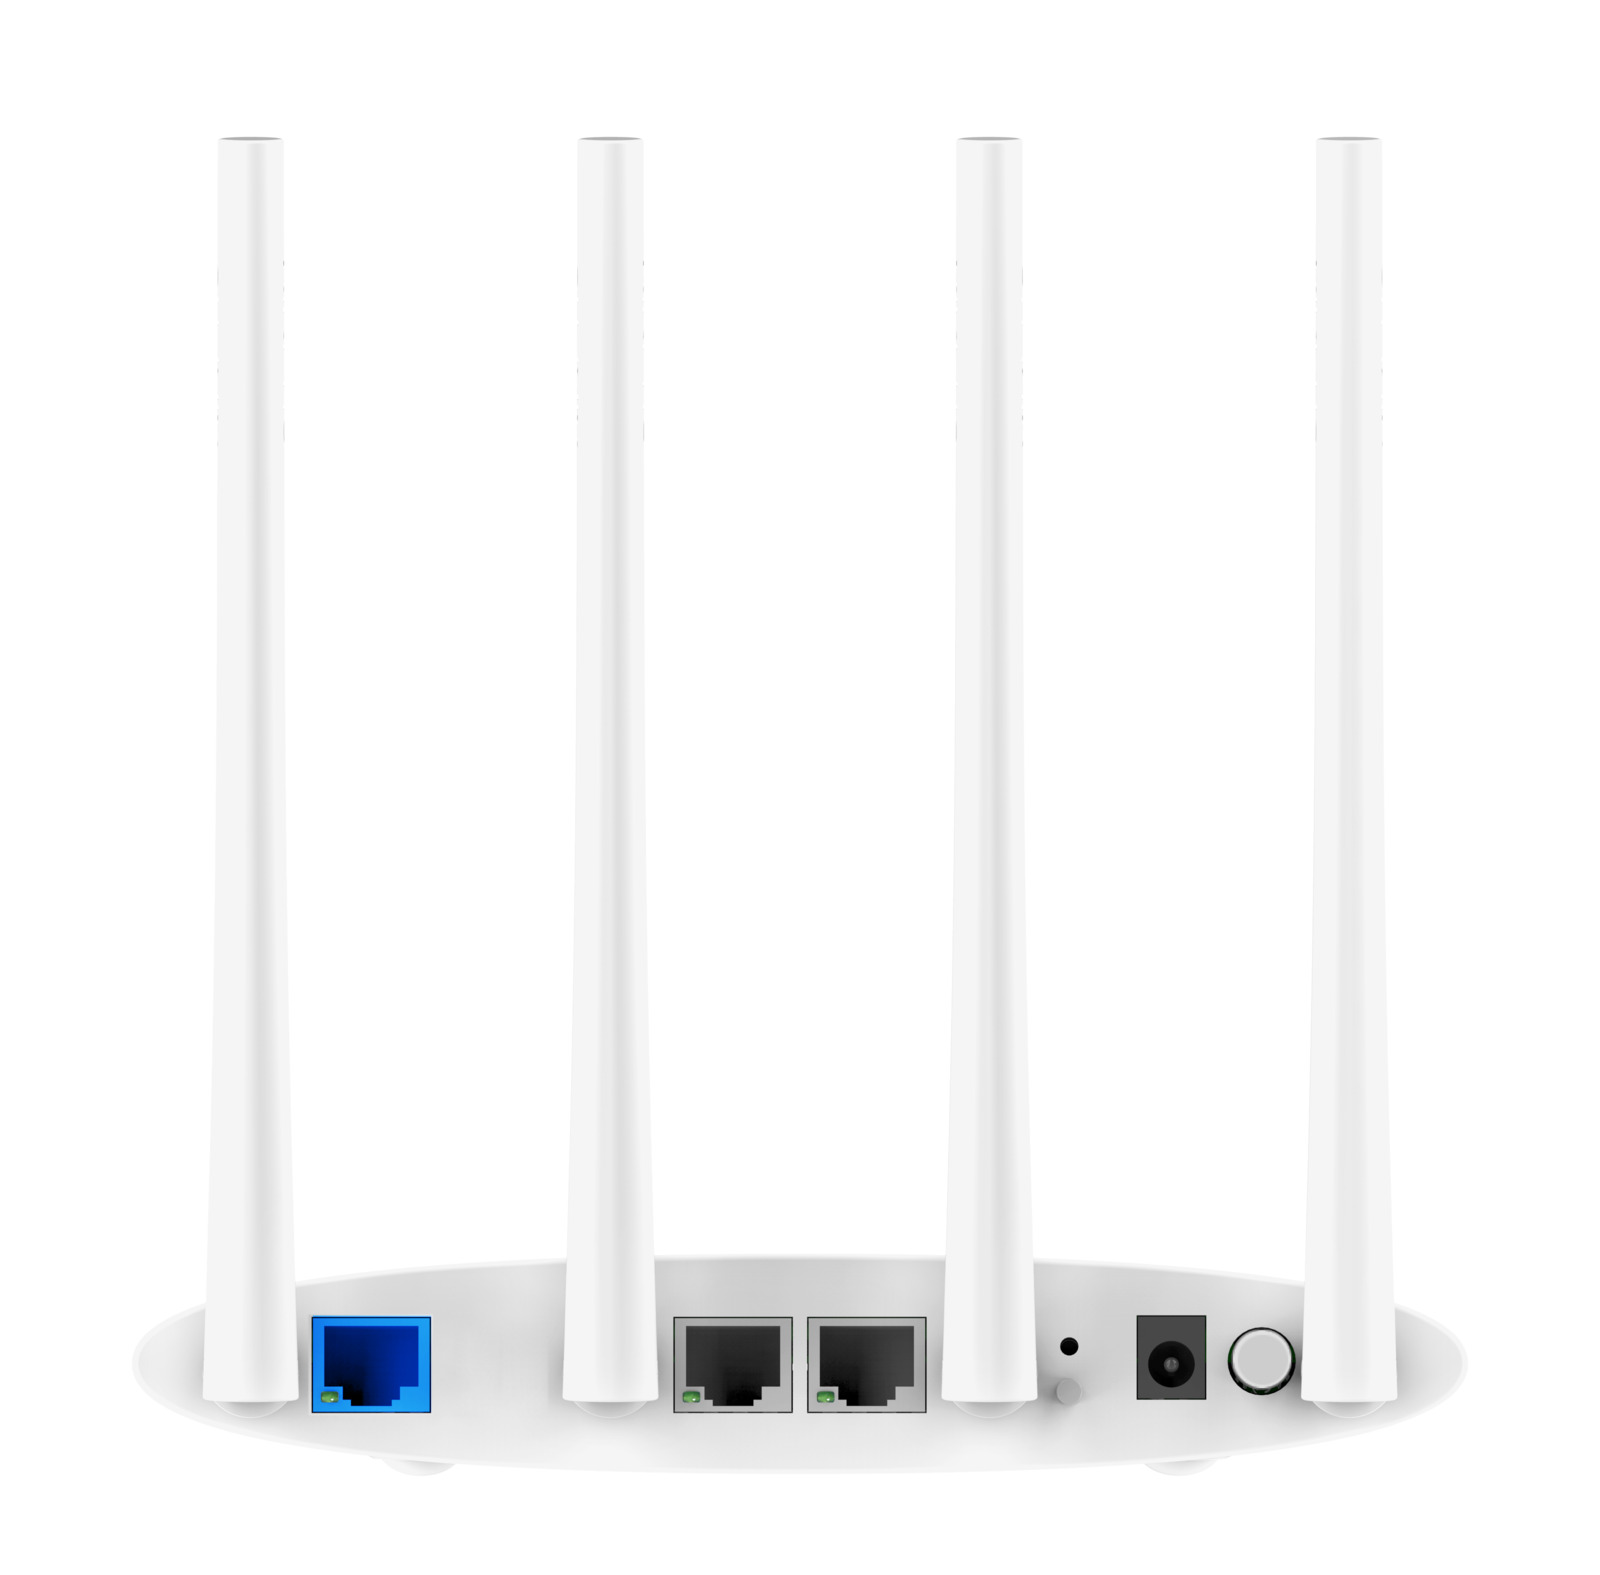 AIRPHO AR-W400 WLAN 1200 Mbit/s Router